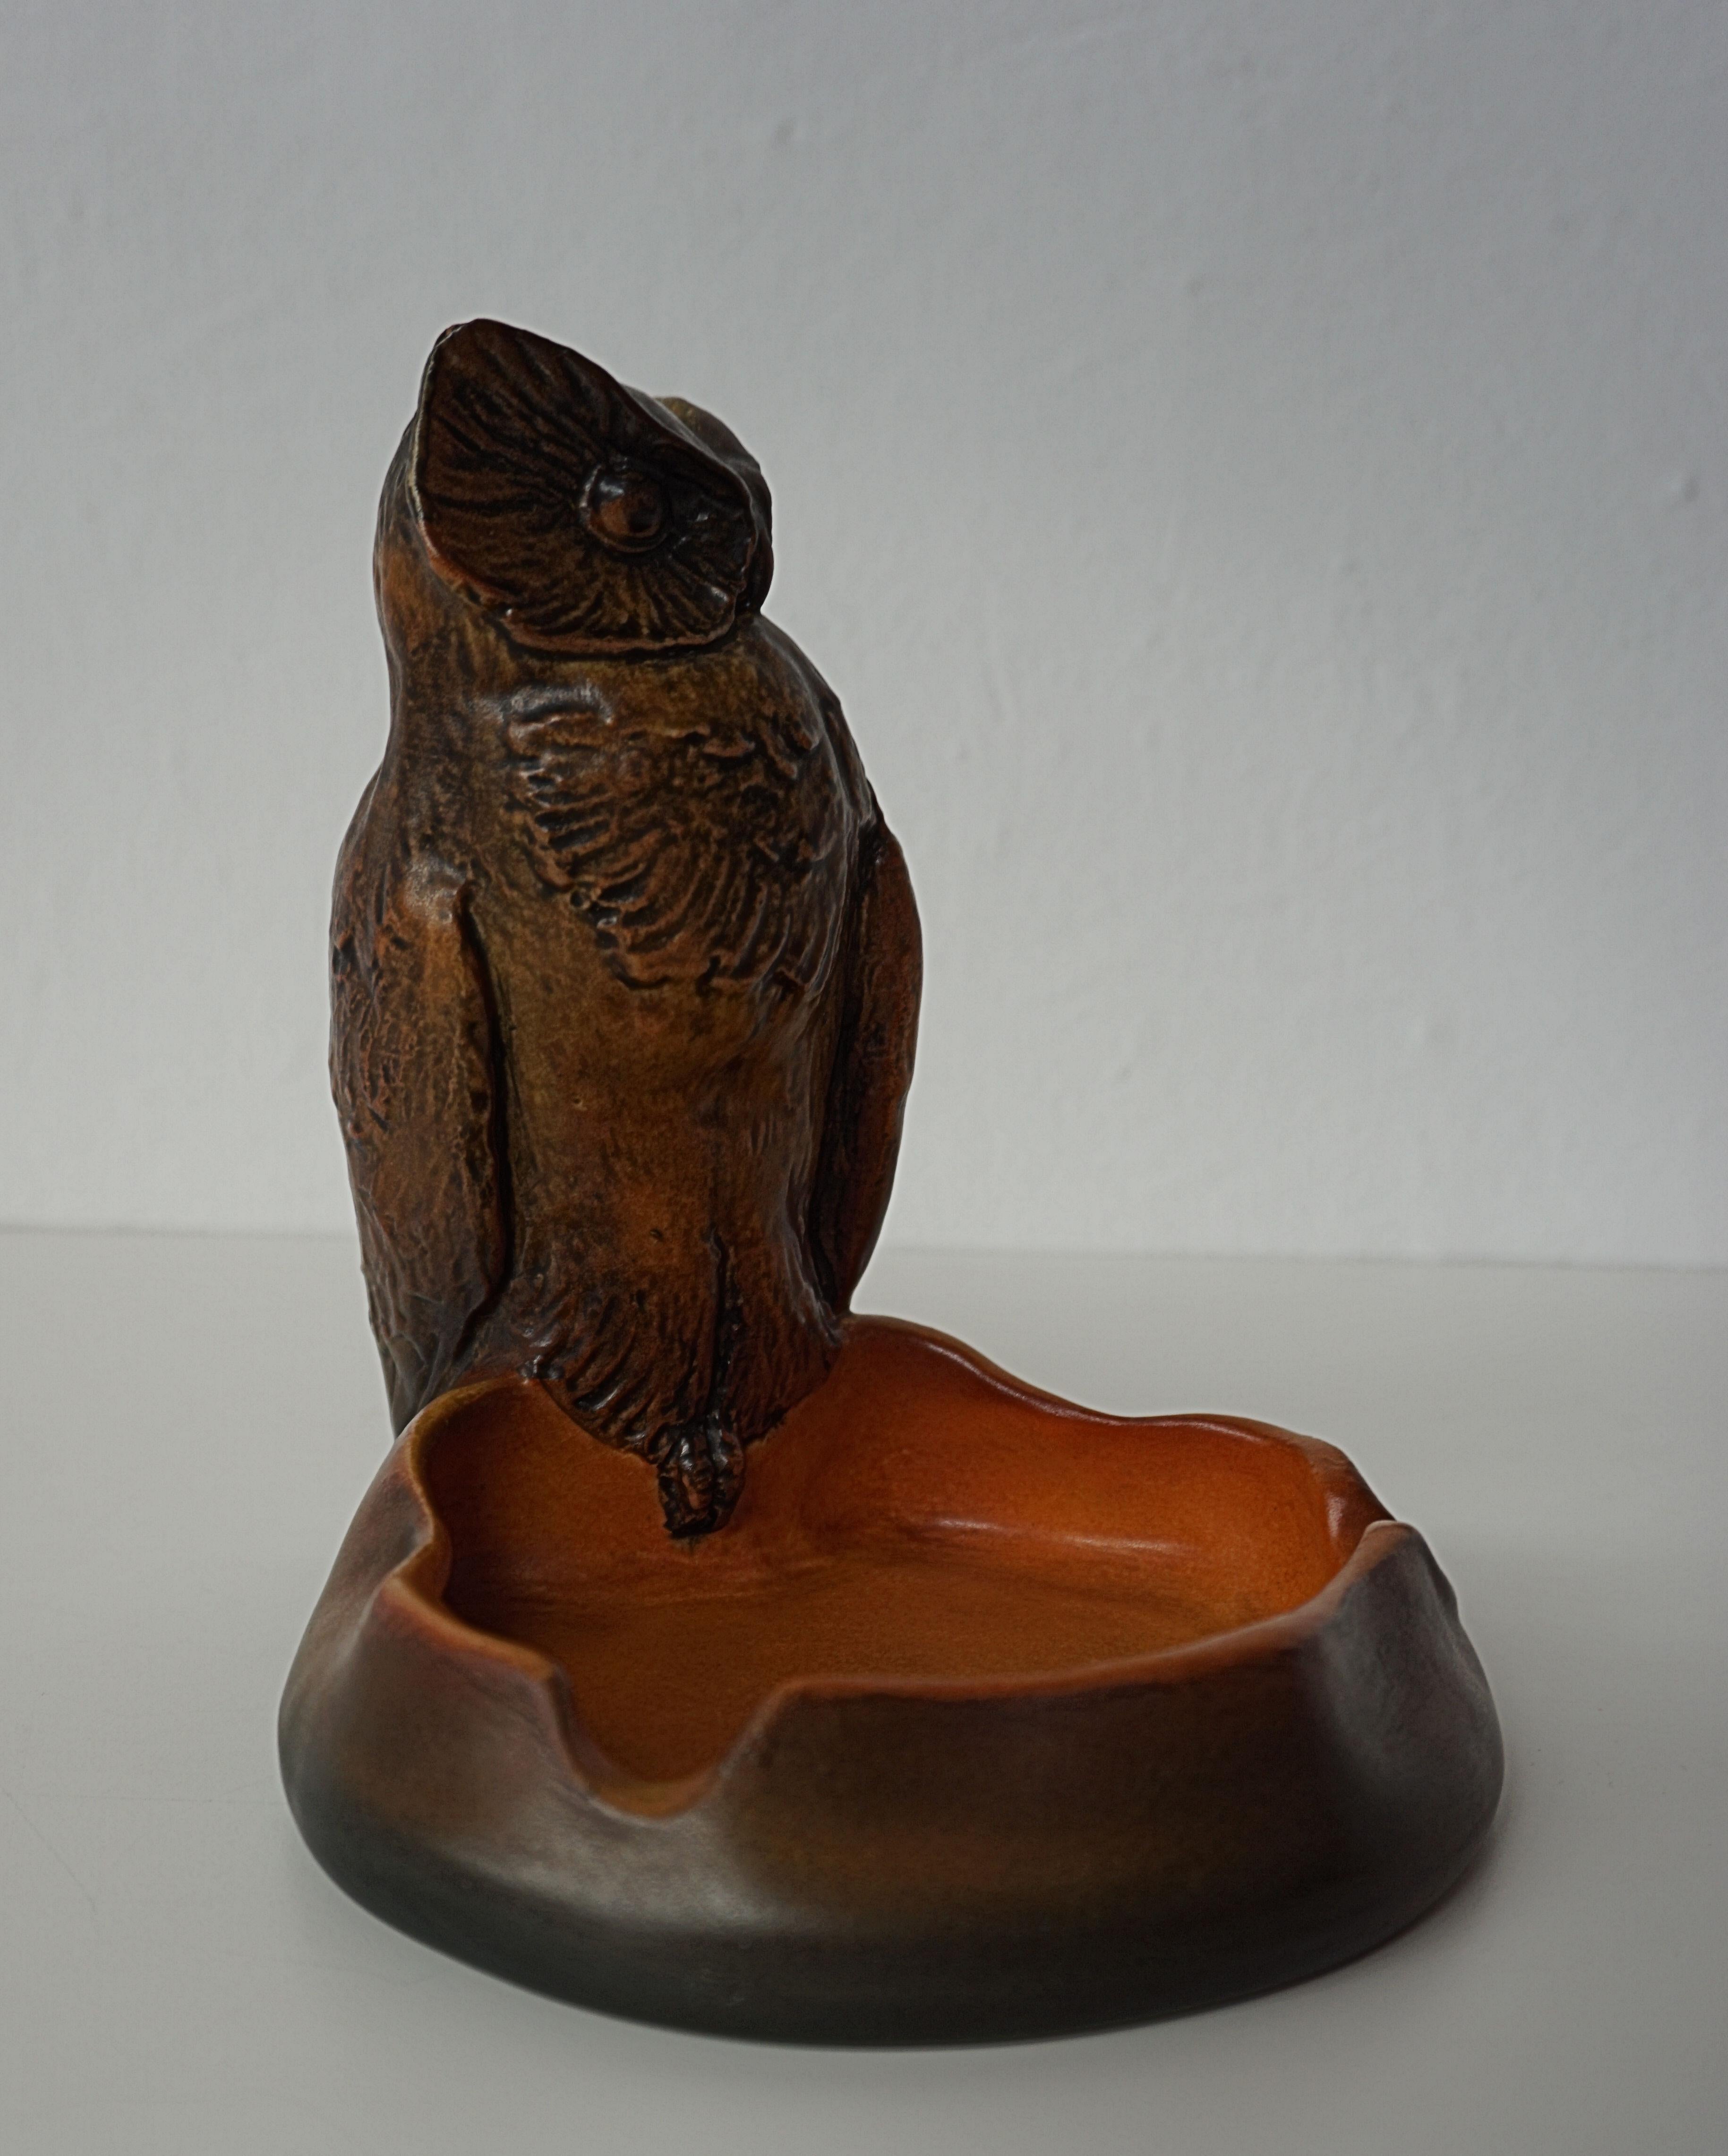 Early 20th Century 1915 Handcrafted Danish Art Nouveau Owl Bowl by Niels Norvill for Ipsens Enke